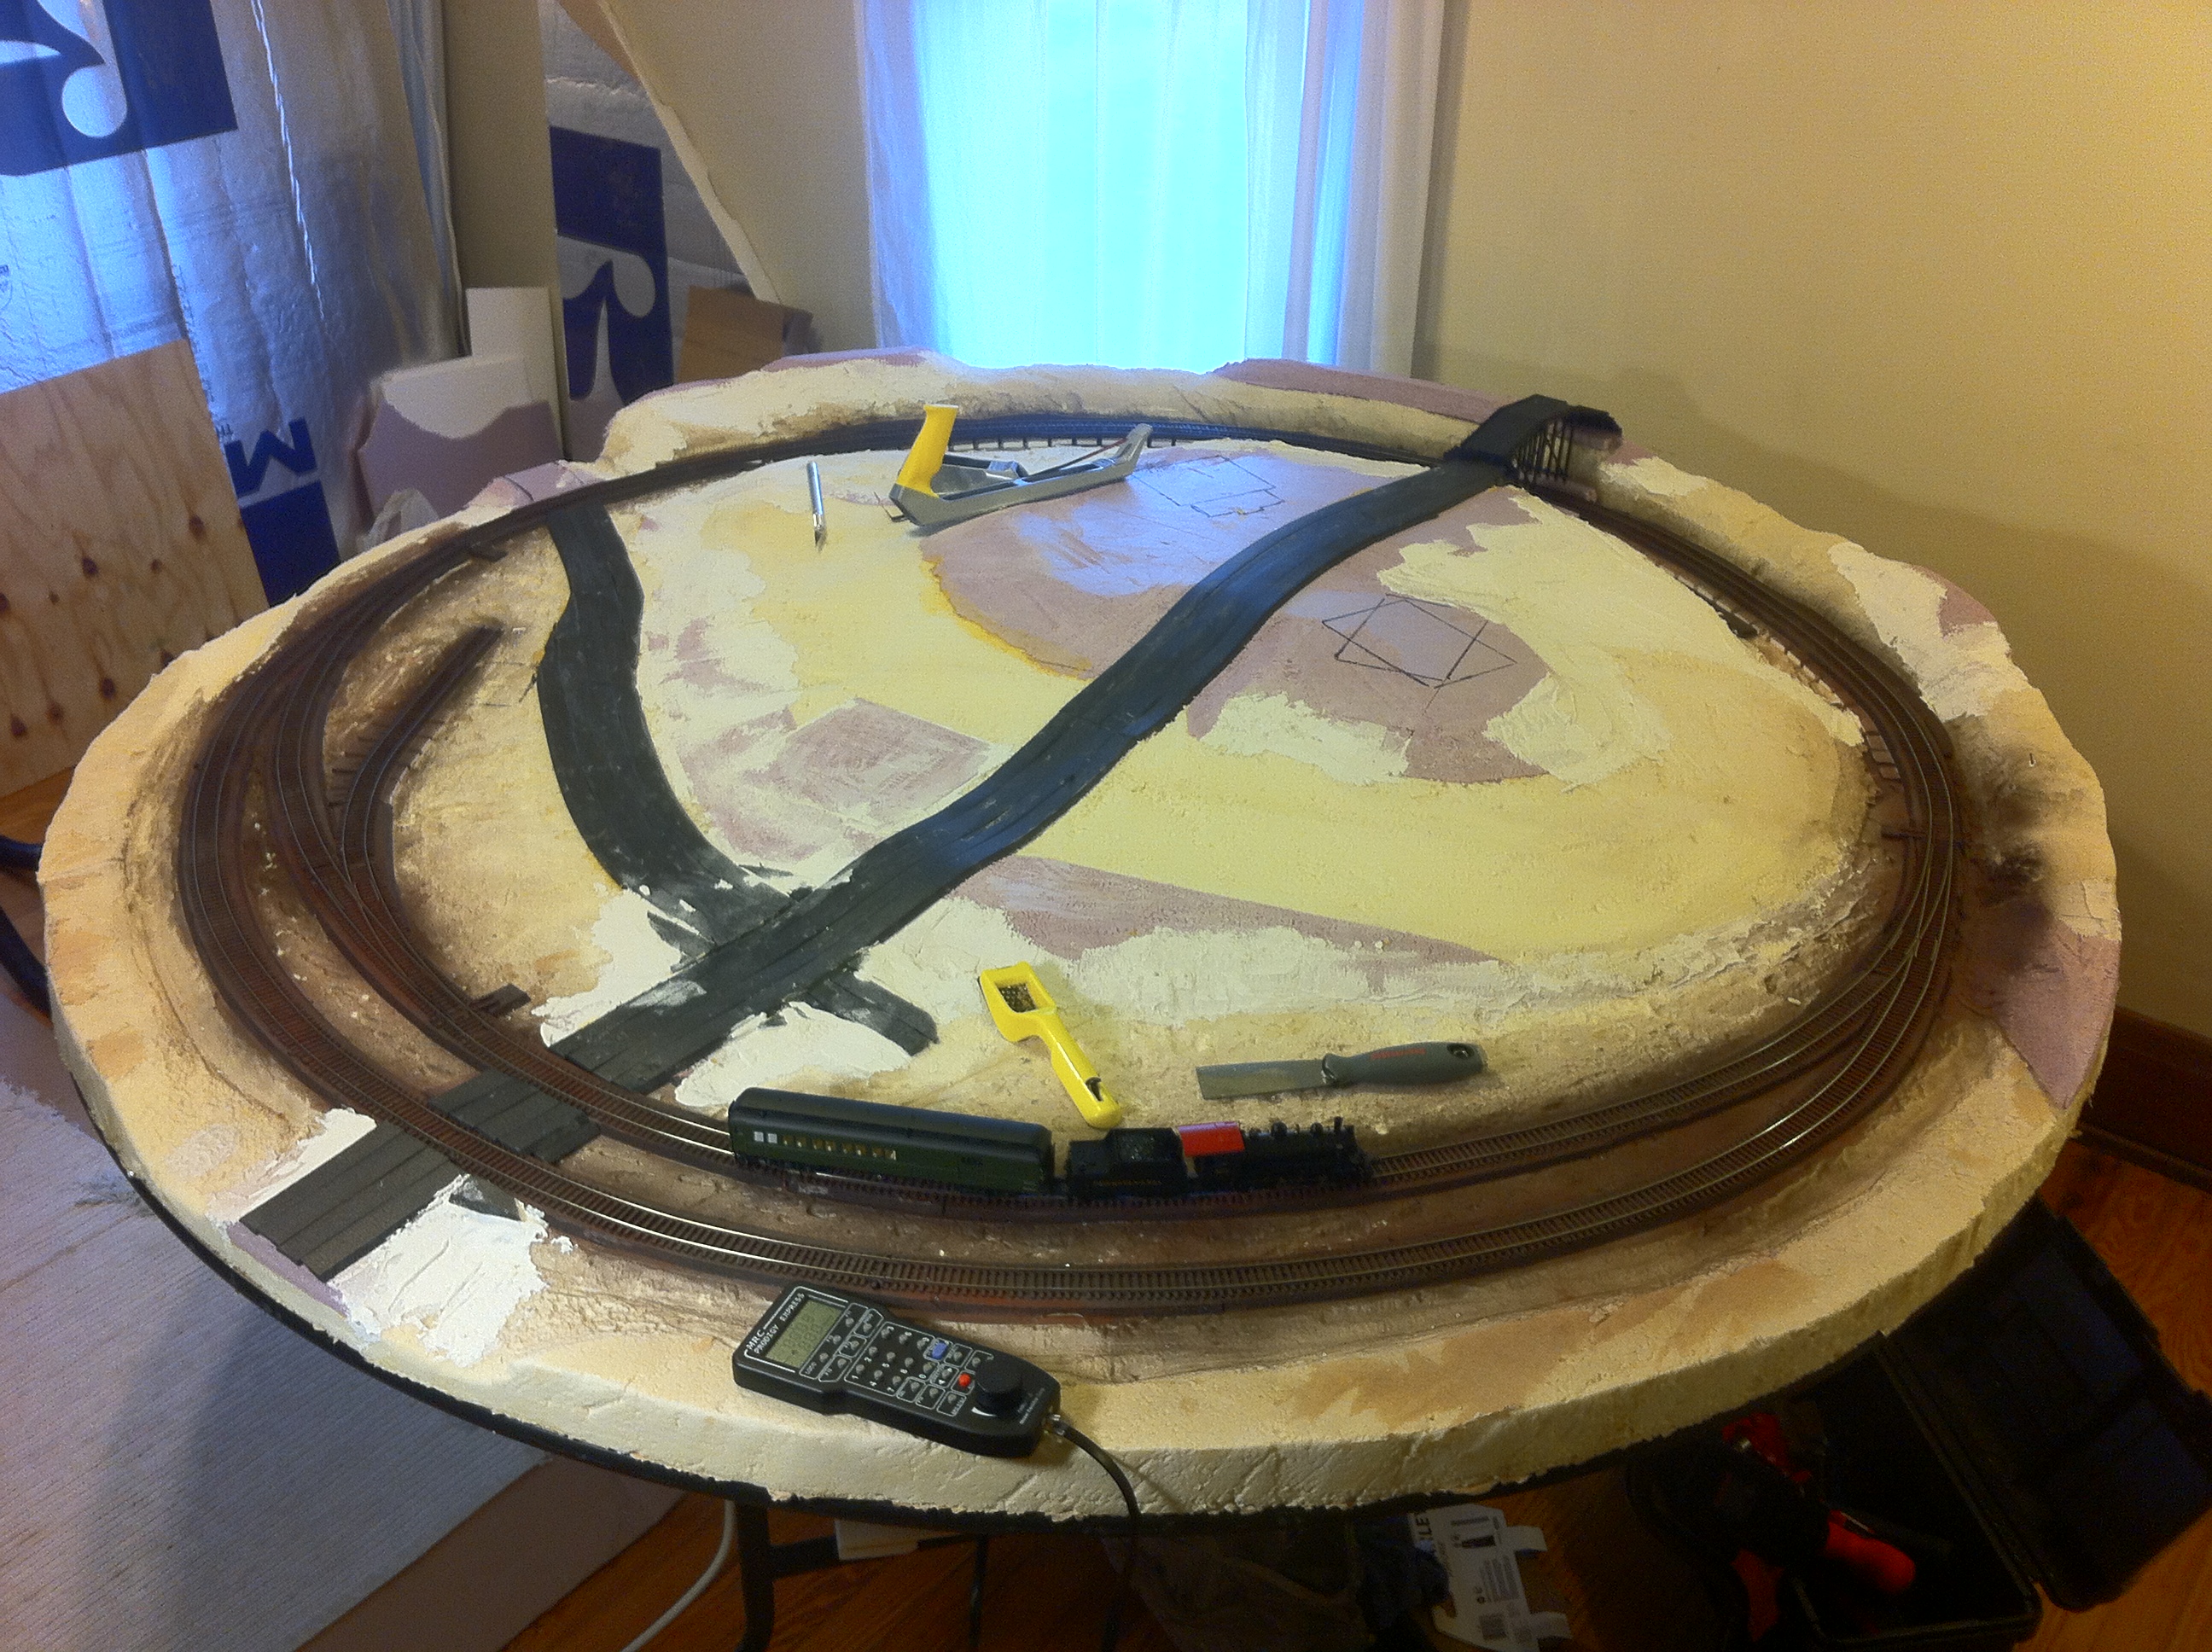 Track laid and wiring complete